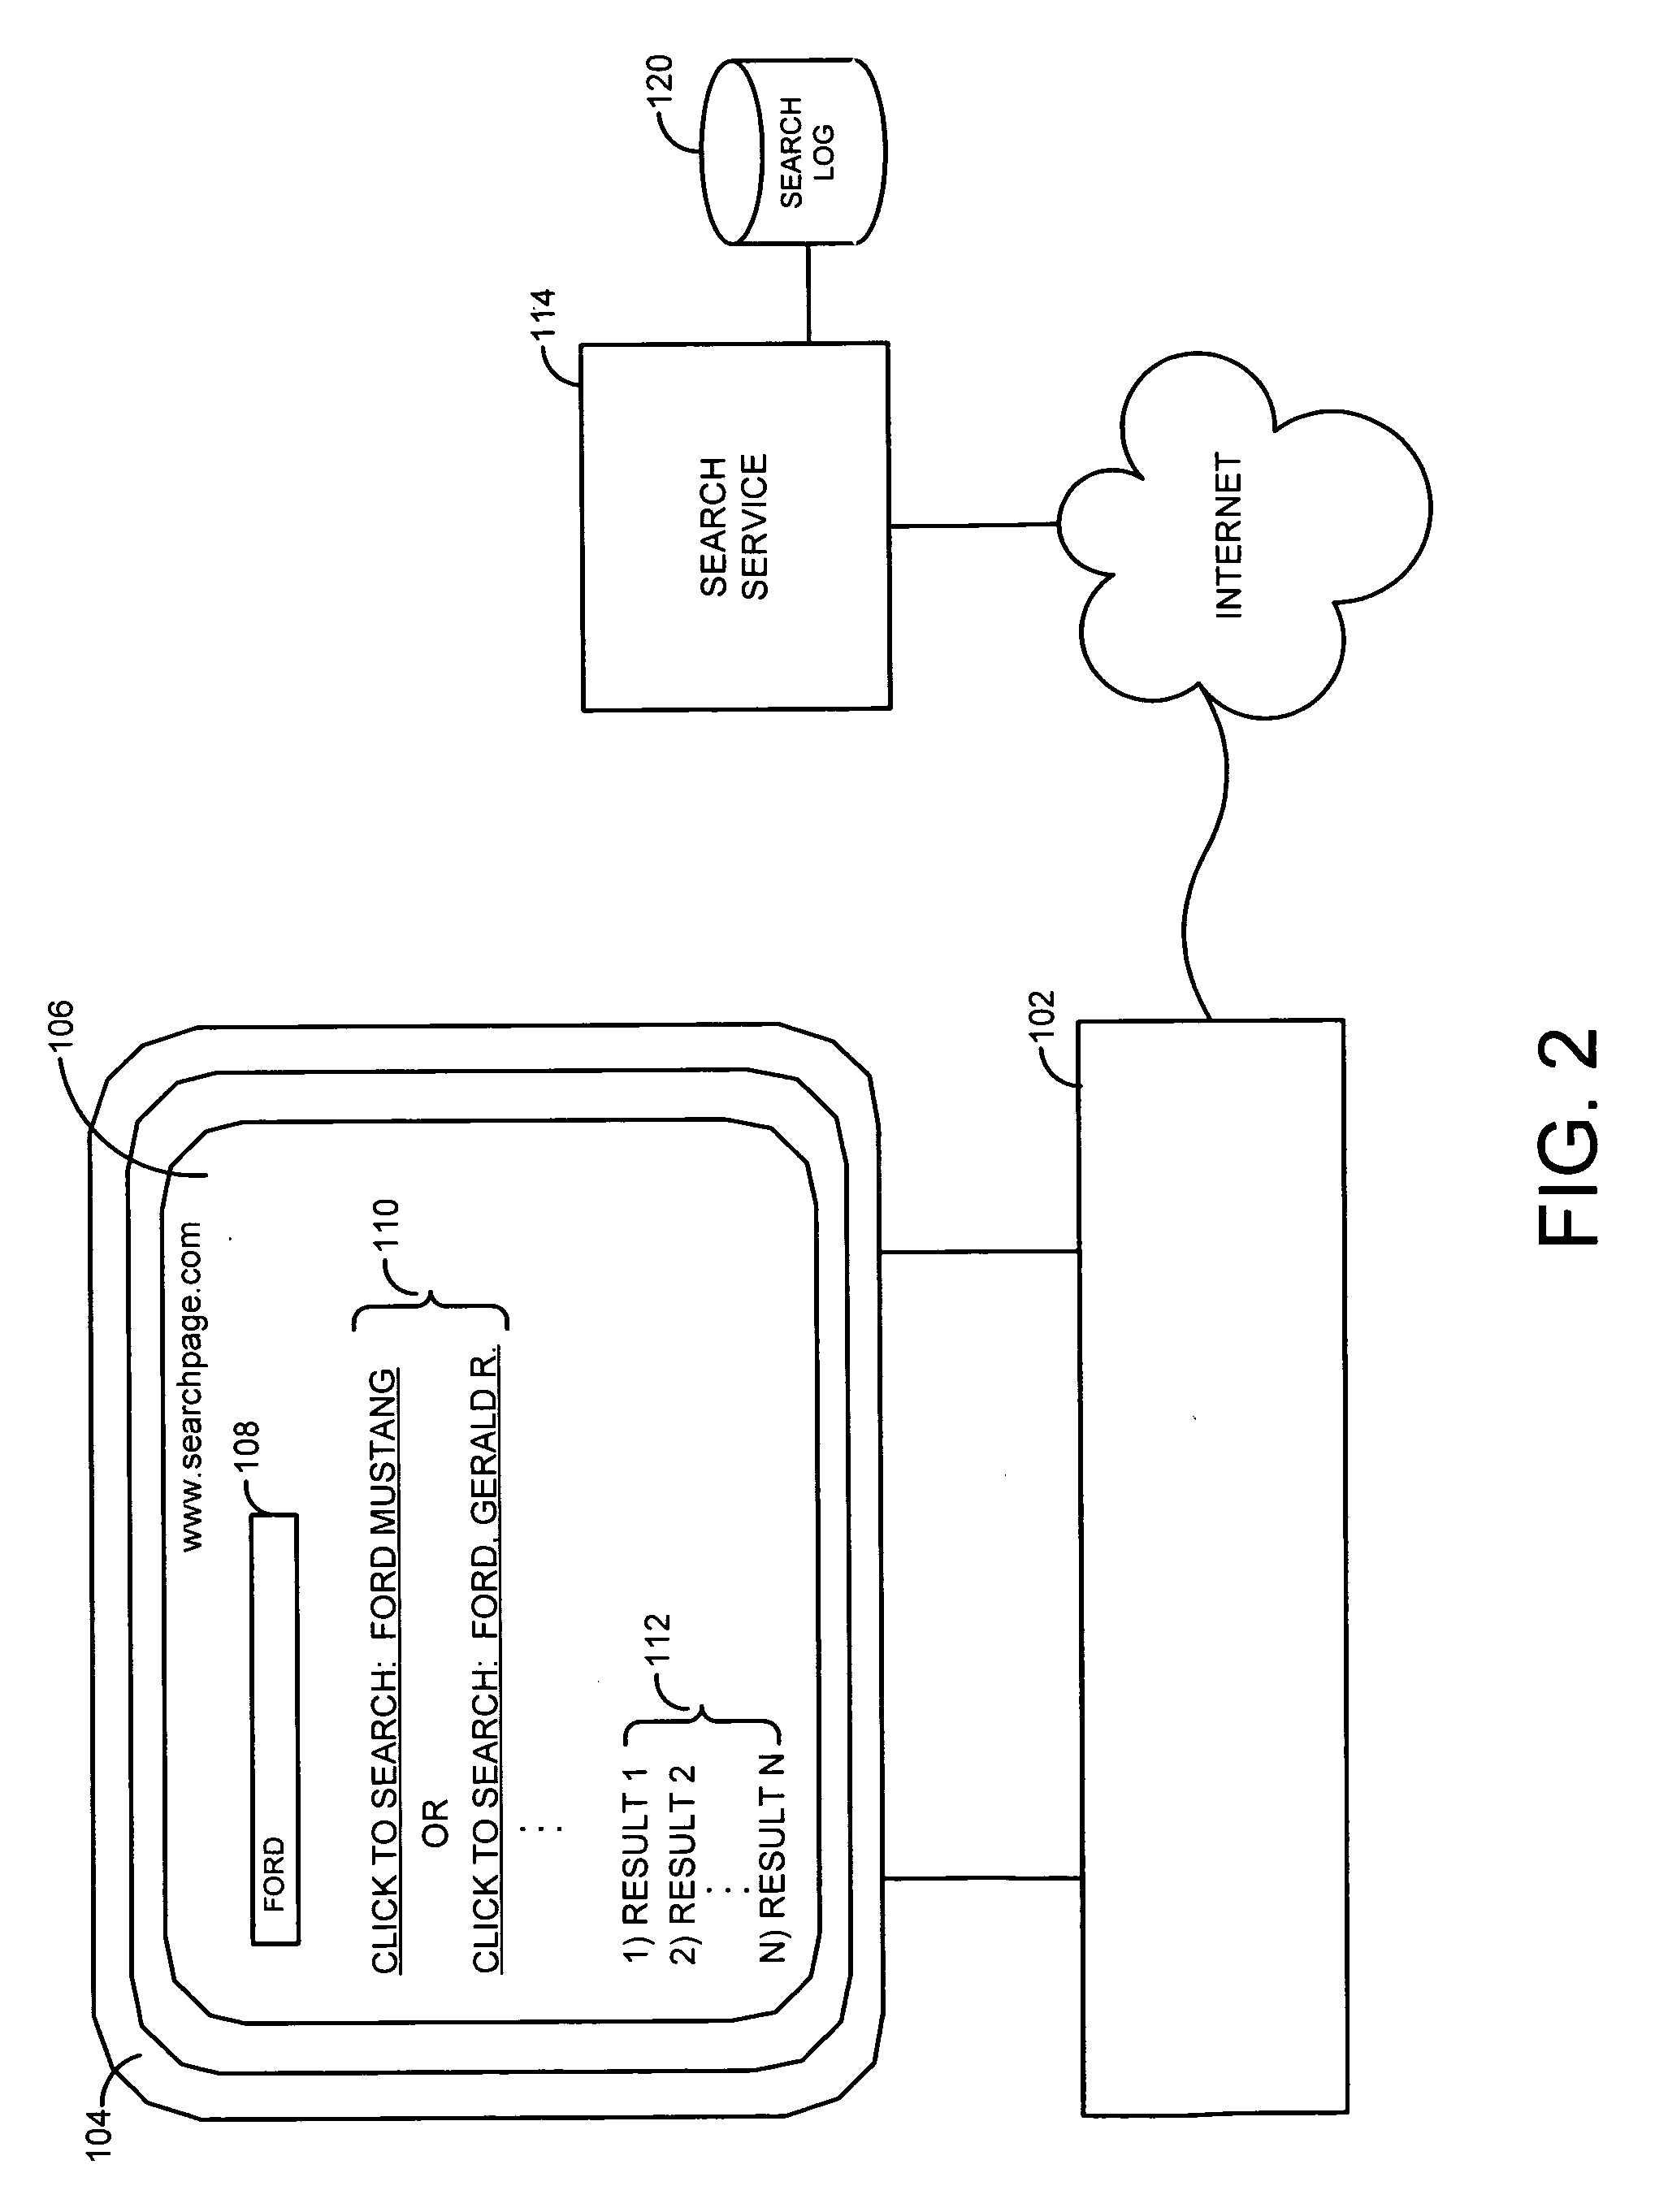 System and method for generating alternative search terms